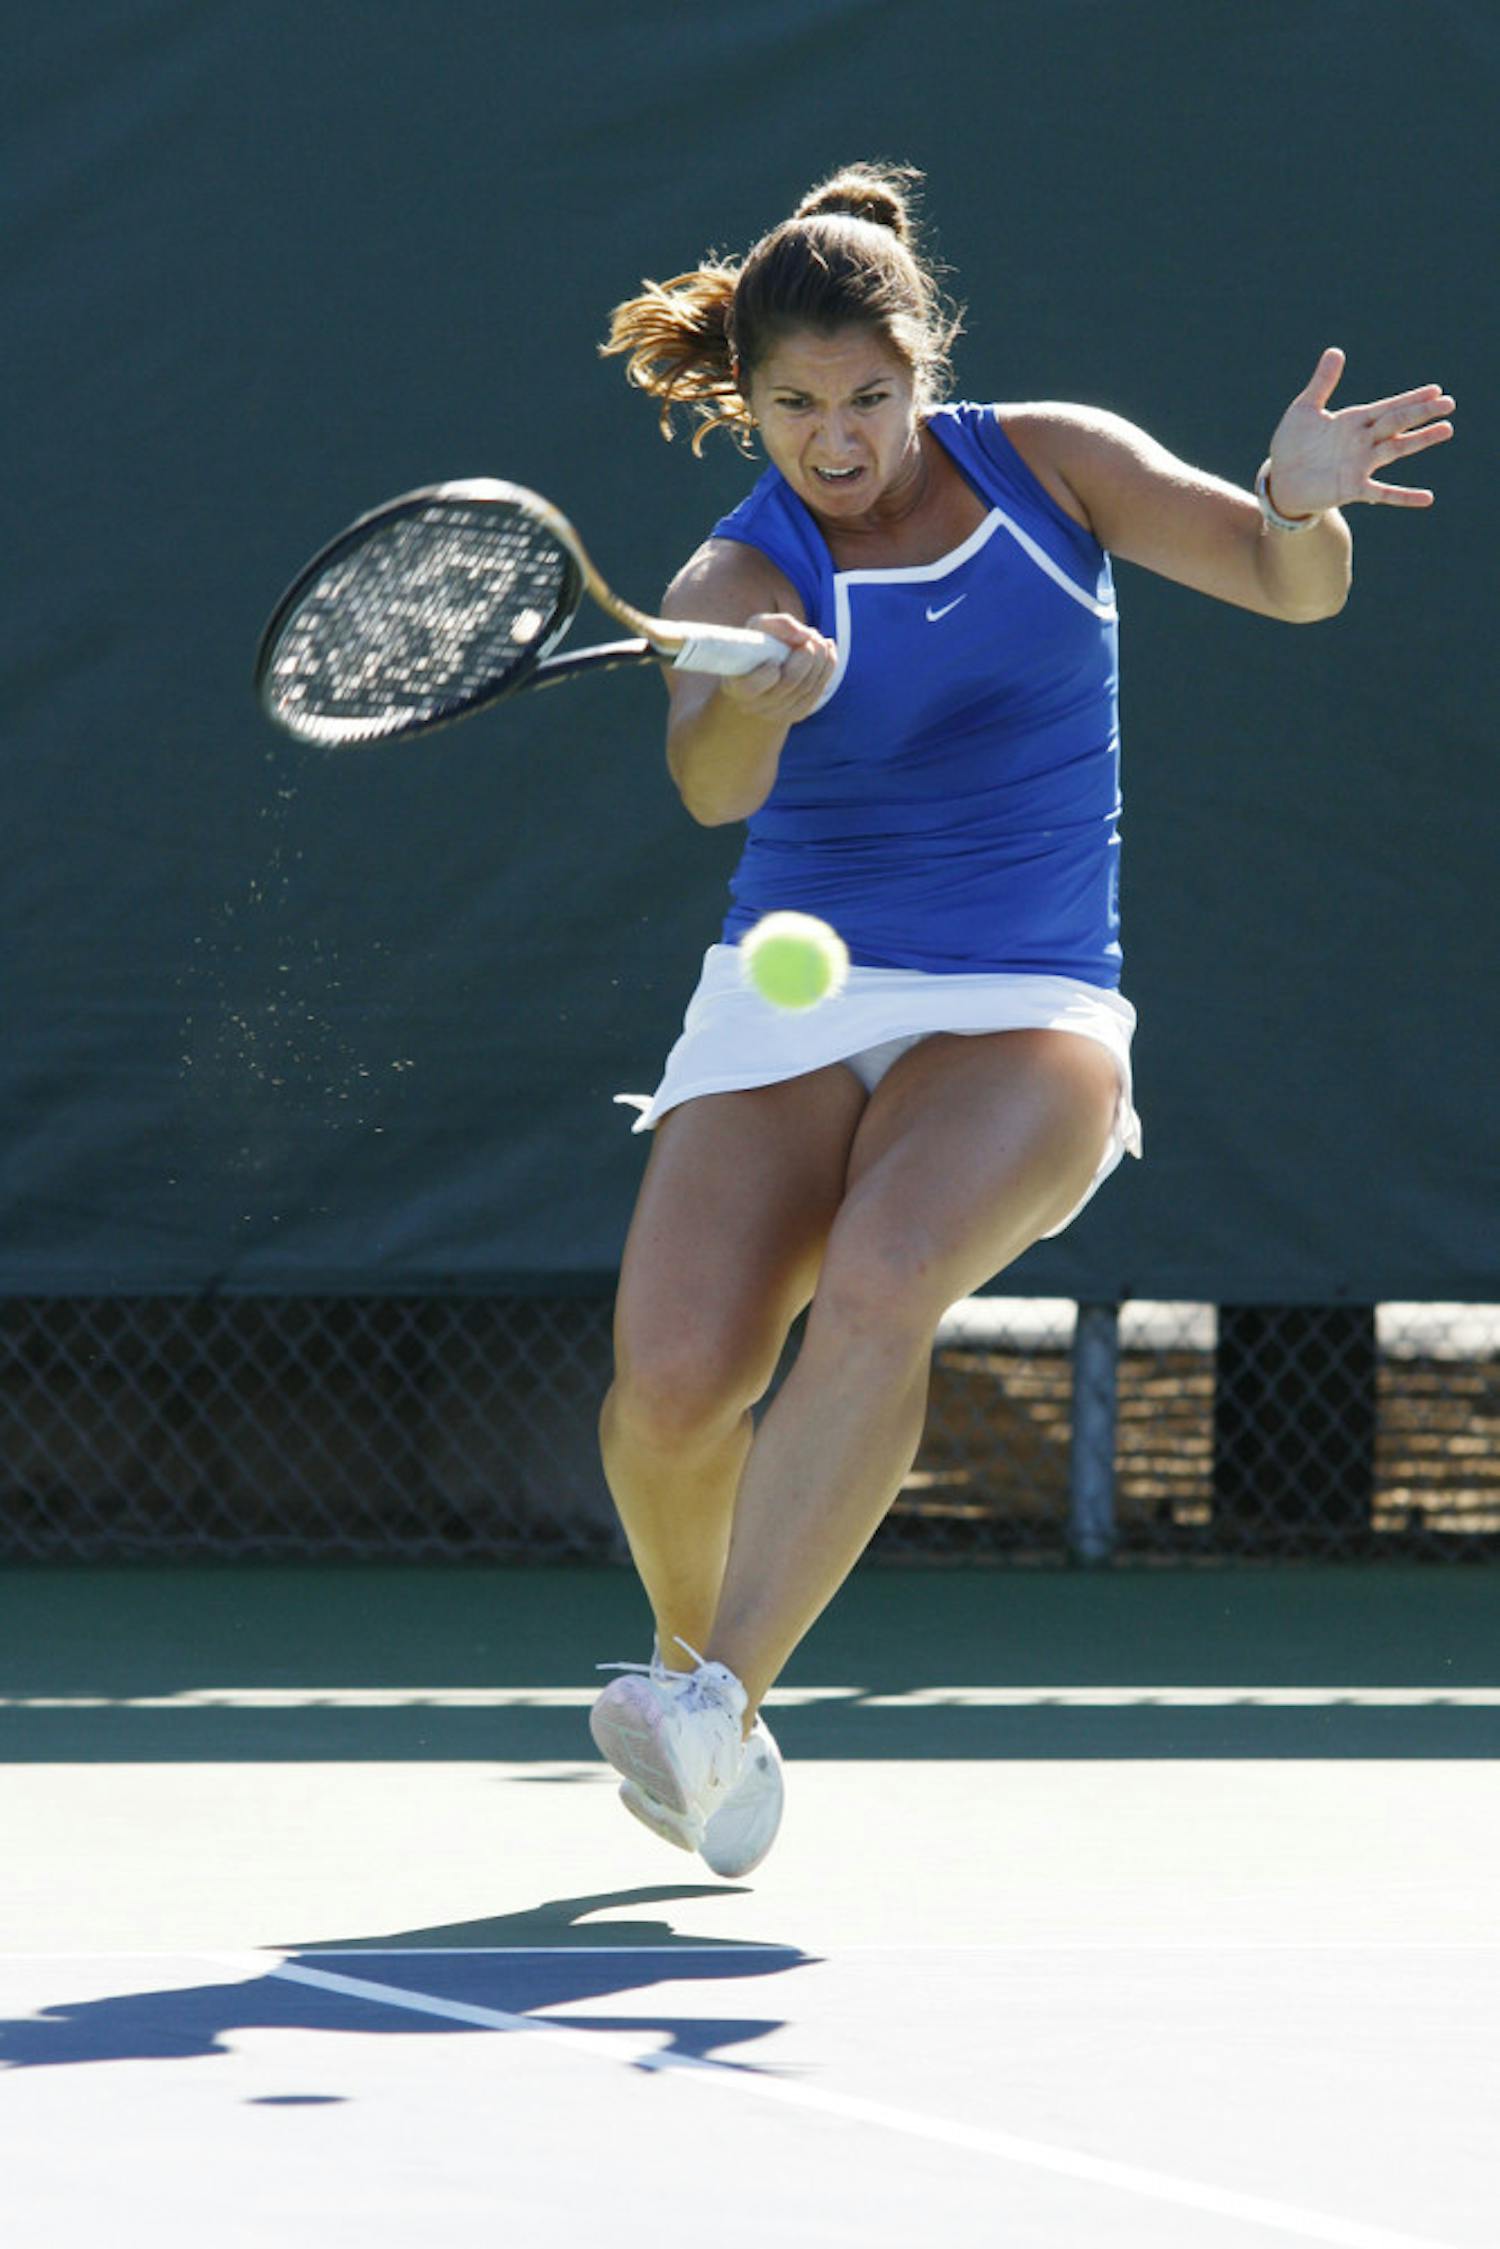 Junior Alexandra Cercone swings during Florida’s 7-0 victory against Baylor on Feb. 2 at Linder Stadium.